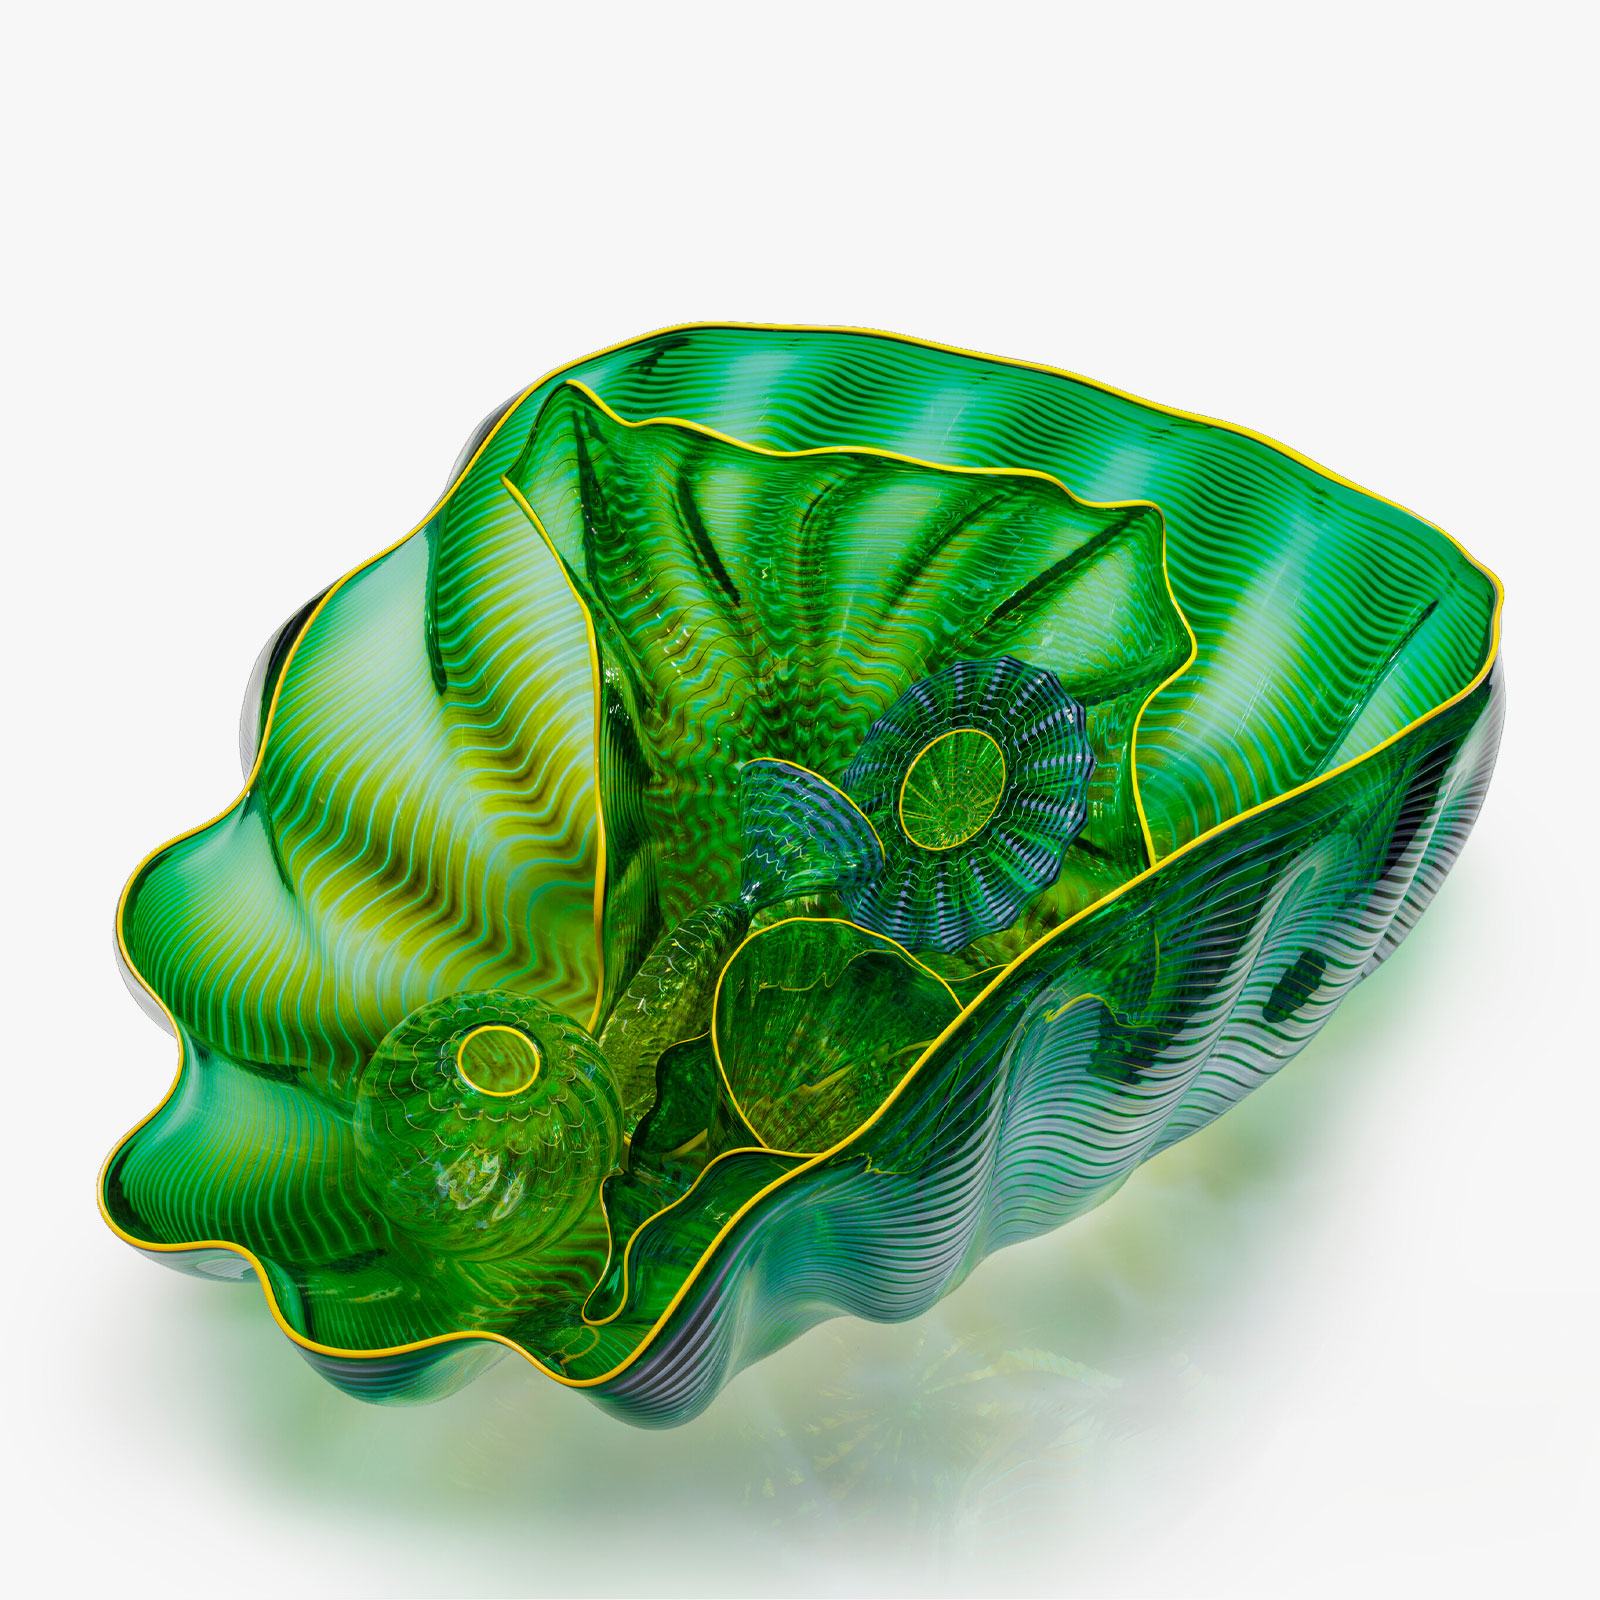 Locarno Green Seaform Set with Amber Yellow Lip Wraps, 2000 by Dale Chihuly